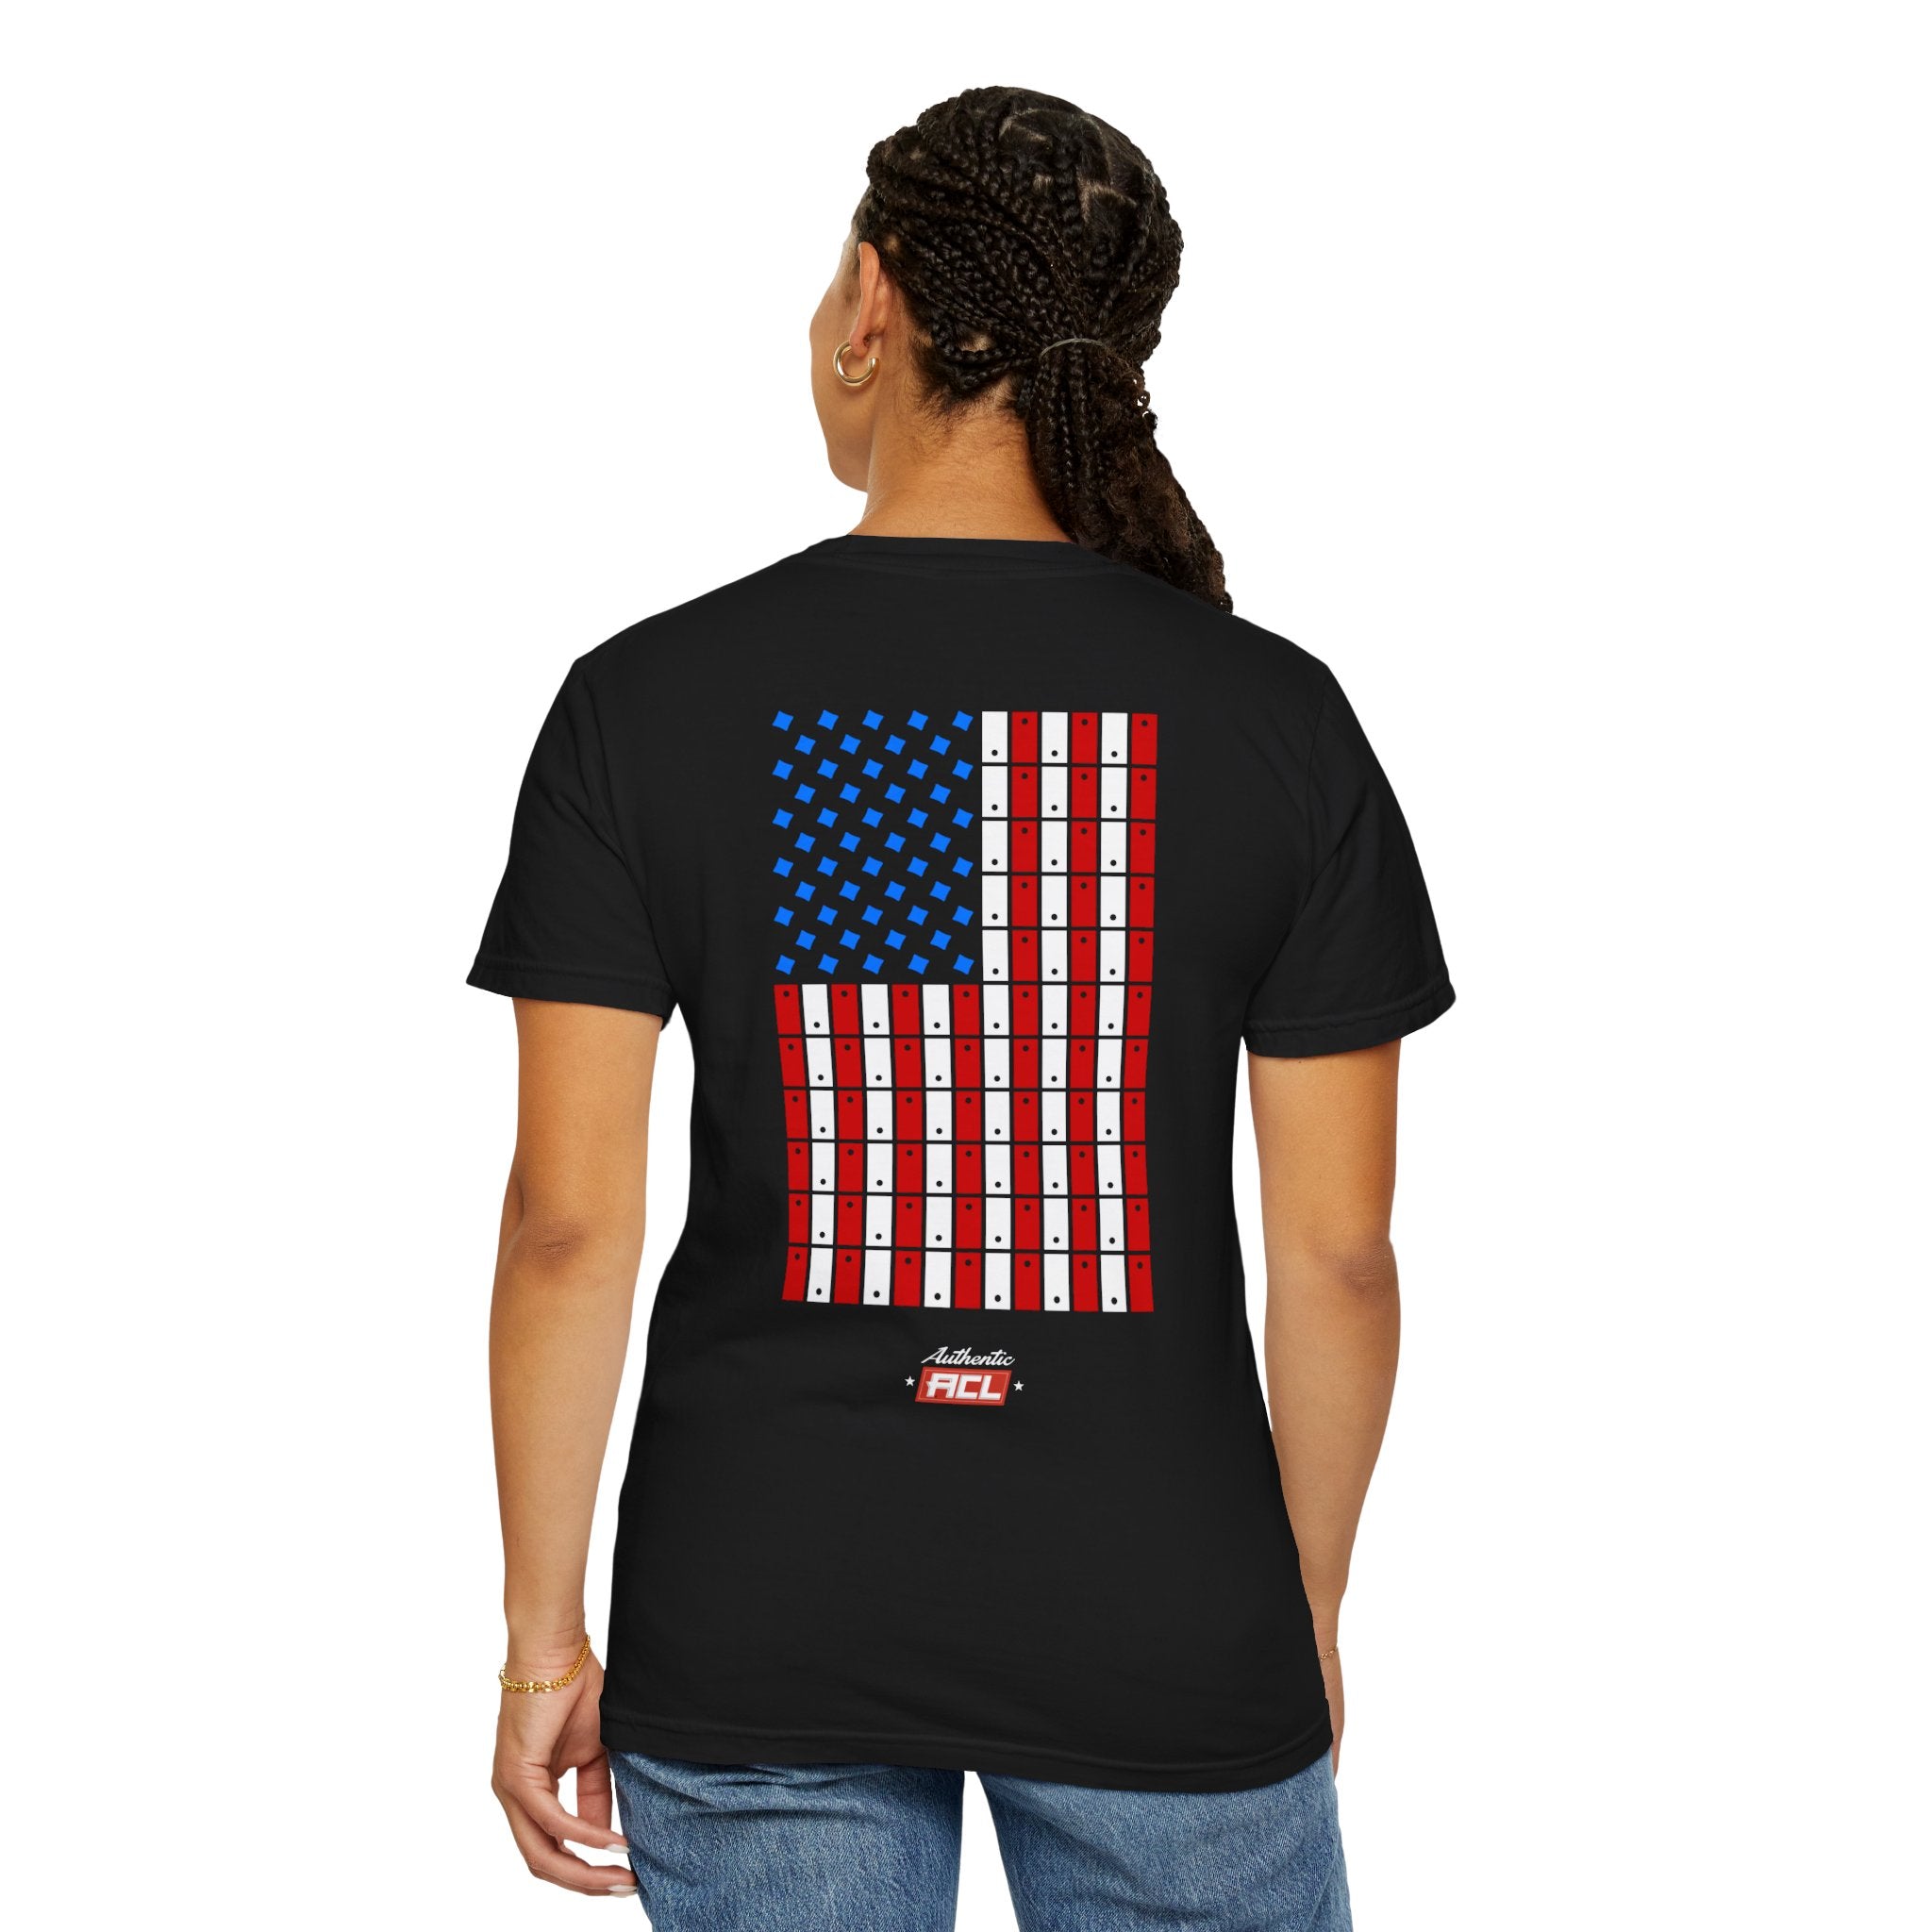 ACL Flag Adult T-shirt